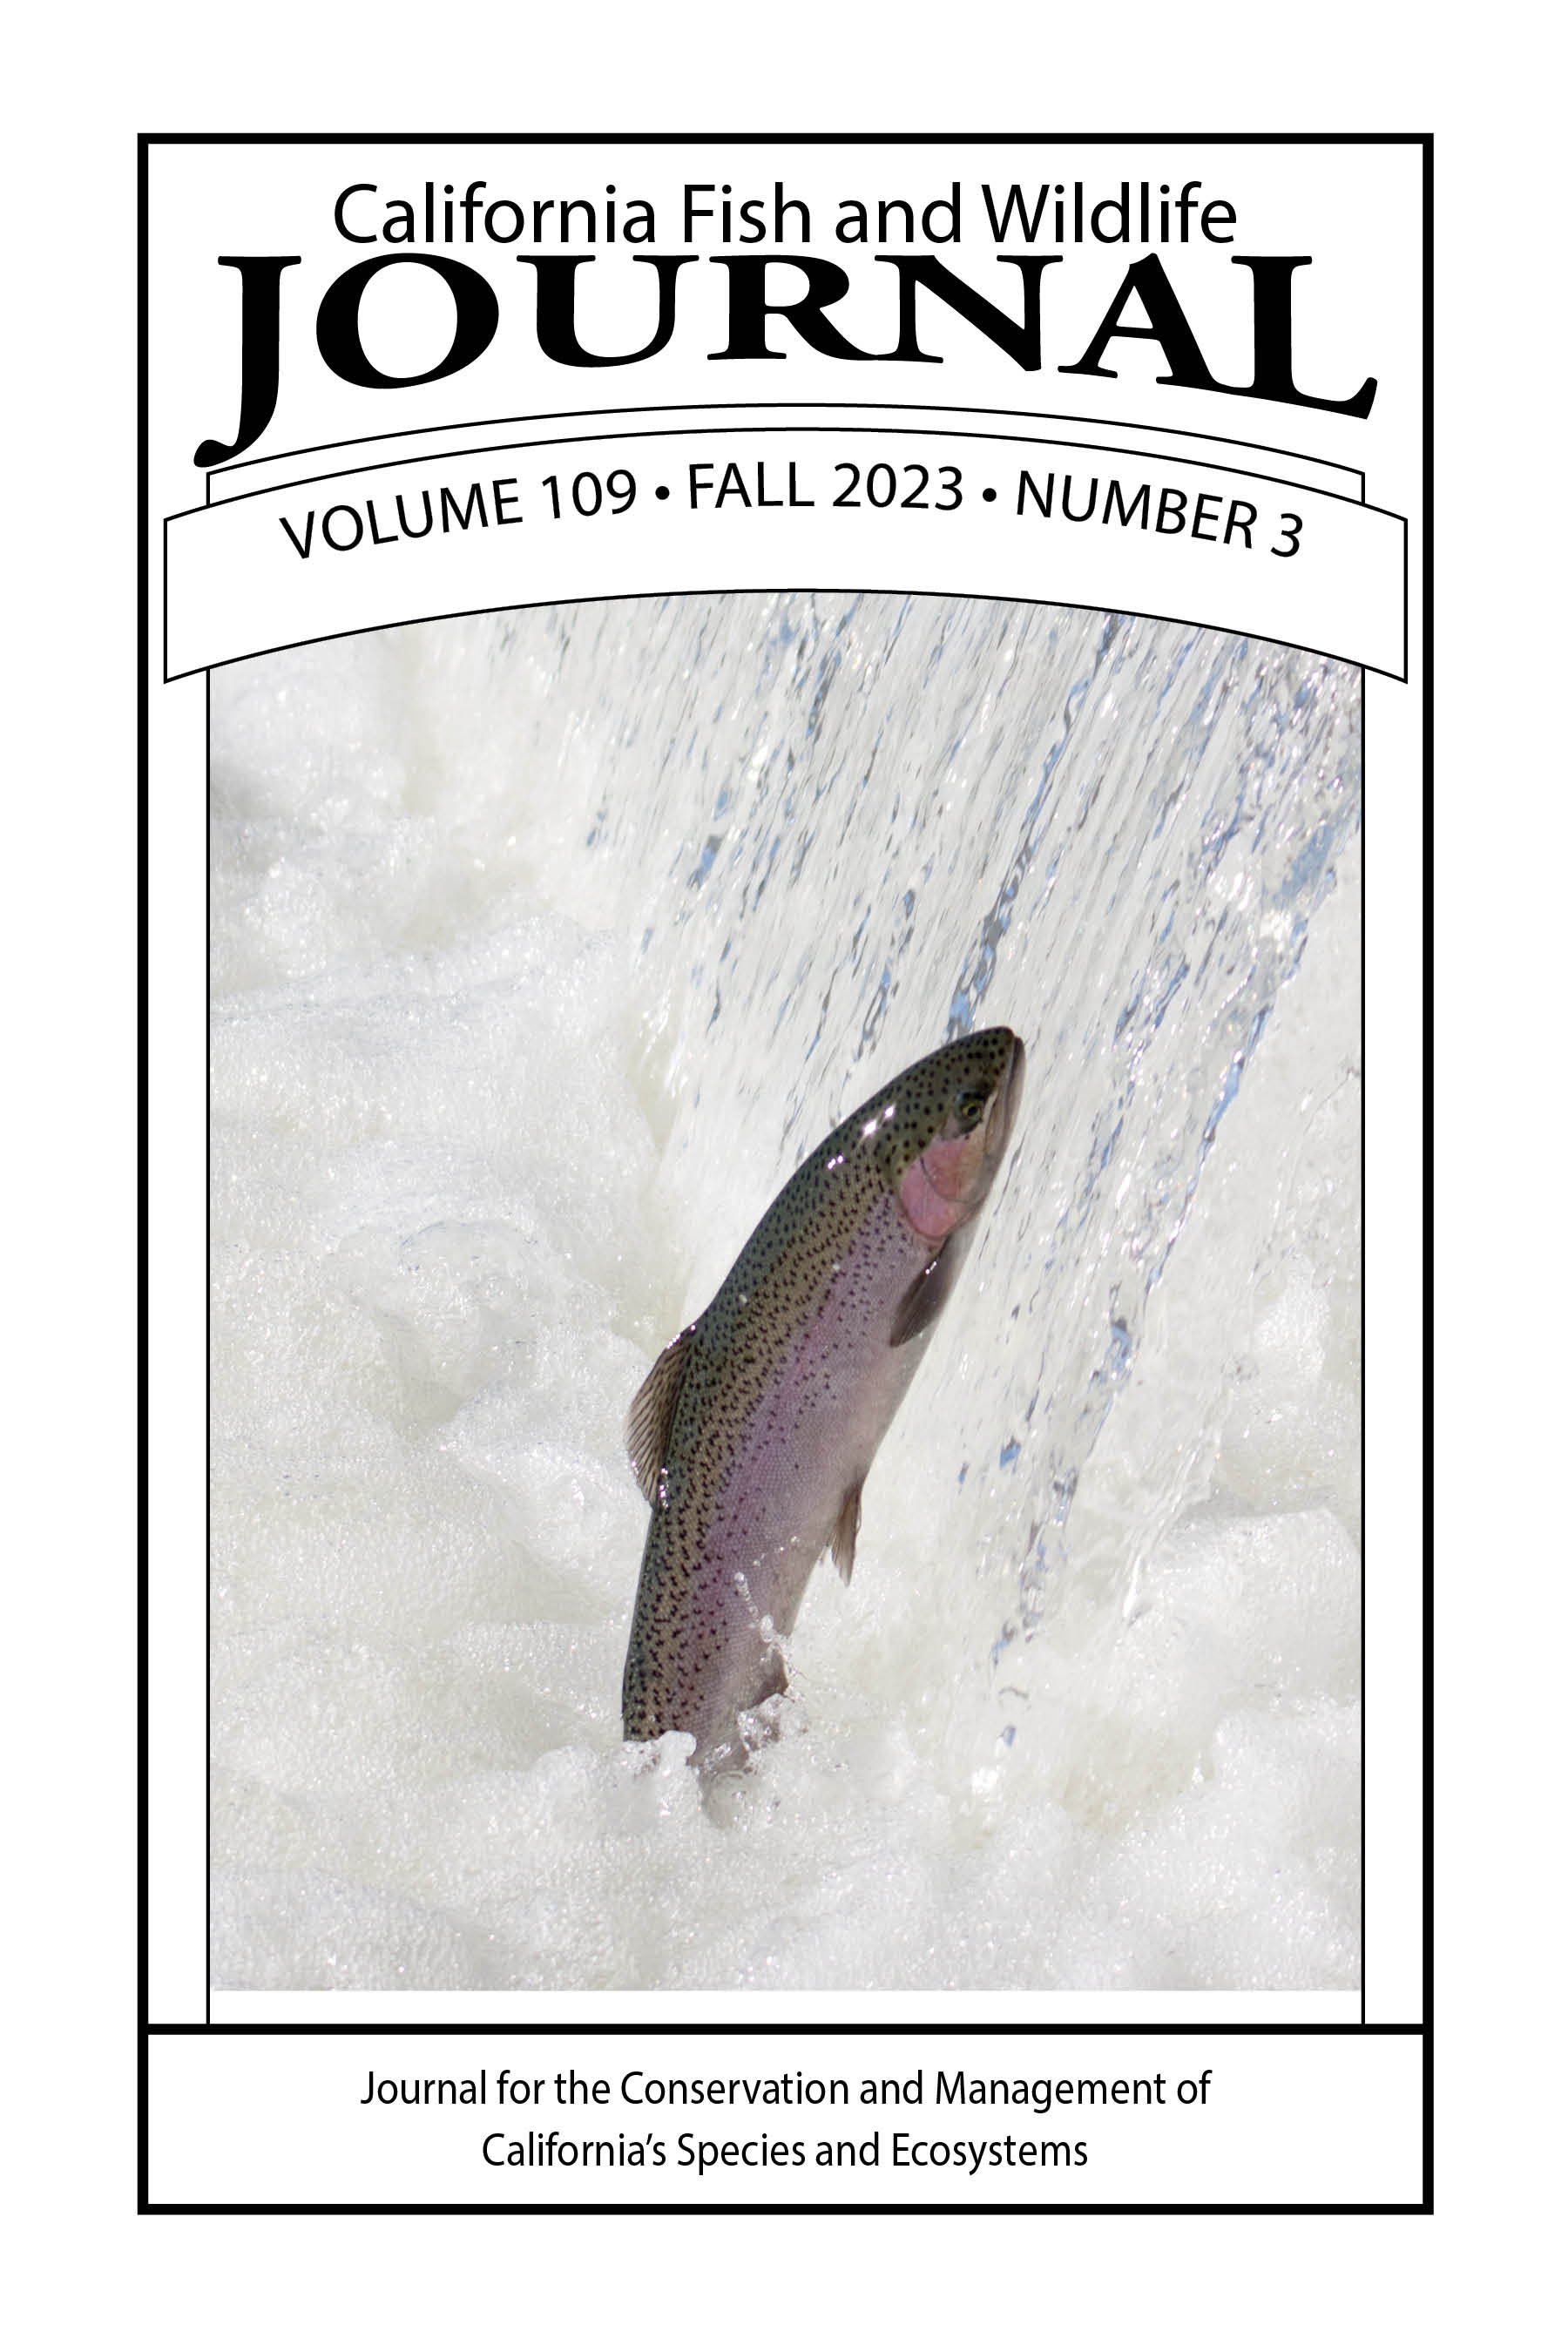 109-3_Cover Cover Image: Adult steelhead jumping in a holding pond at the Coleman National Fish Hatchery, Anderson, CA 